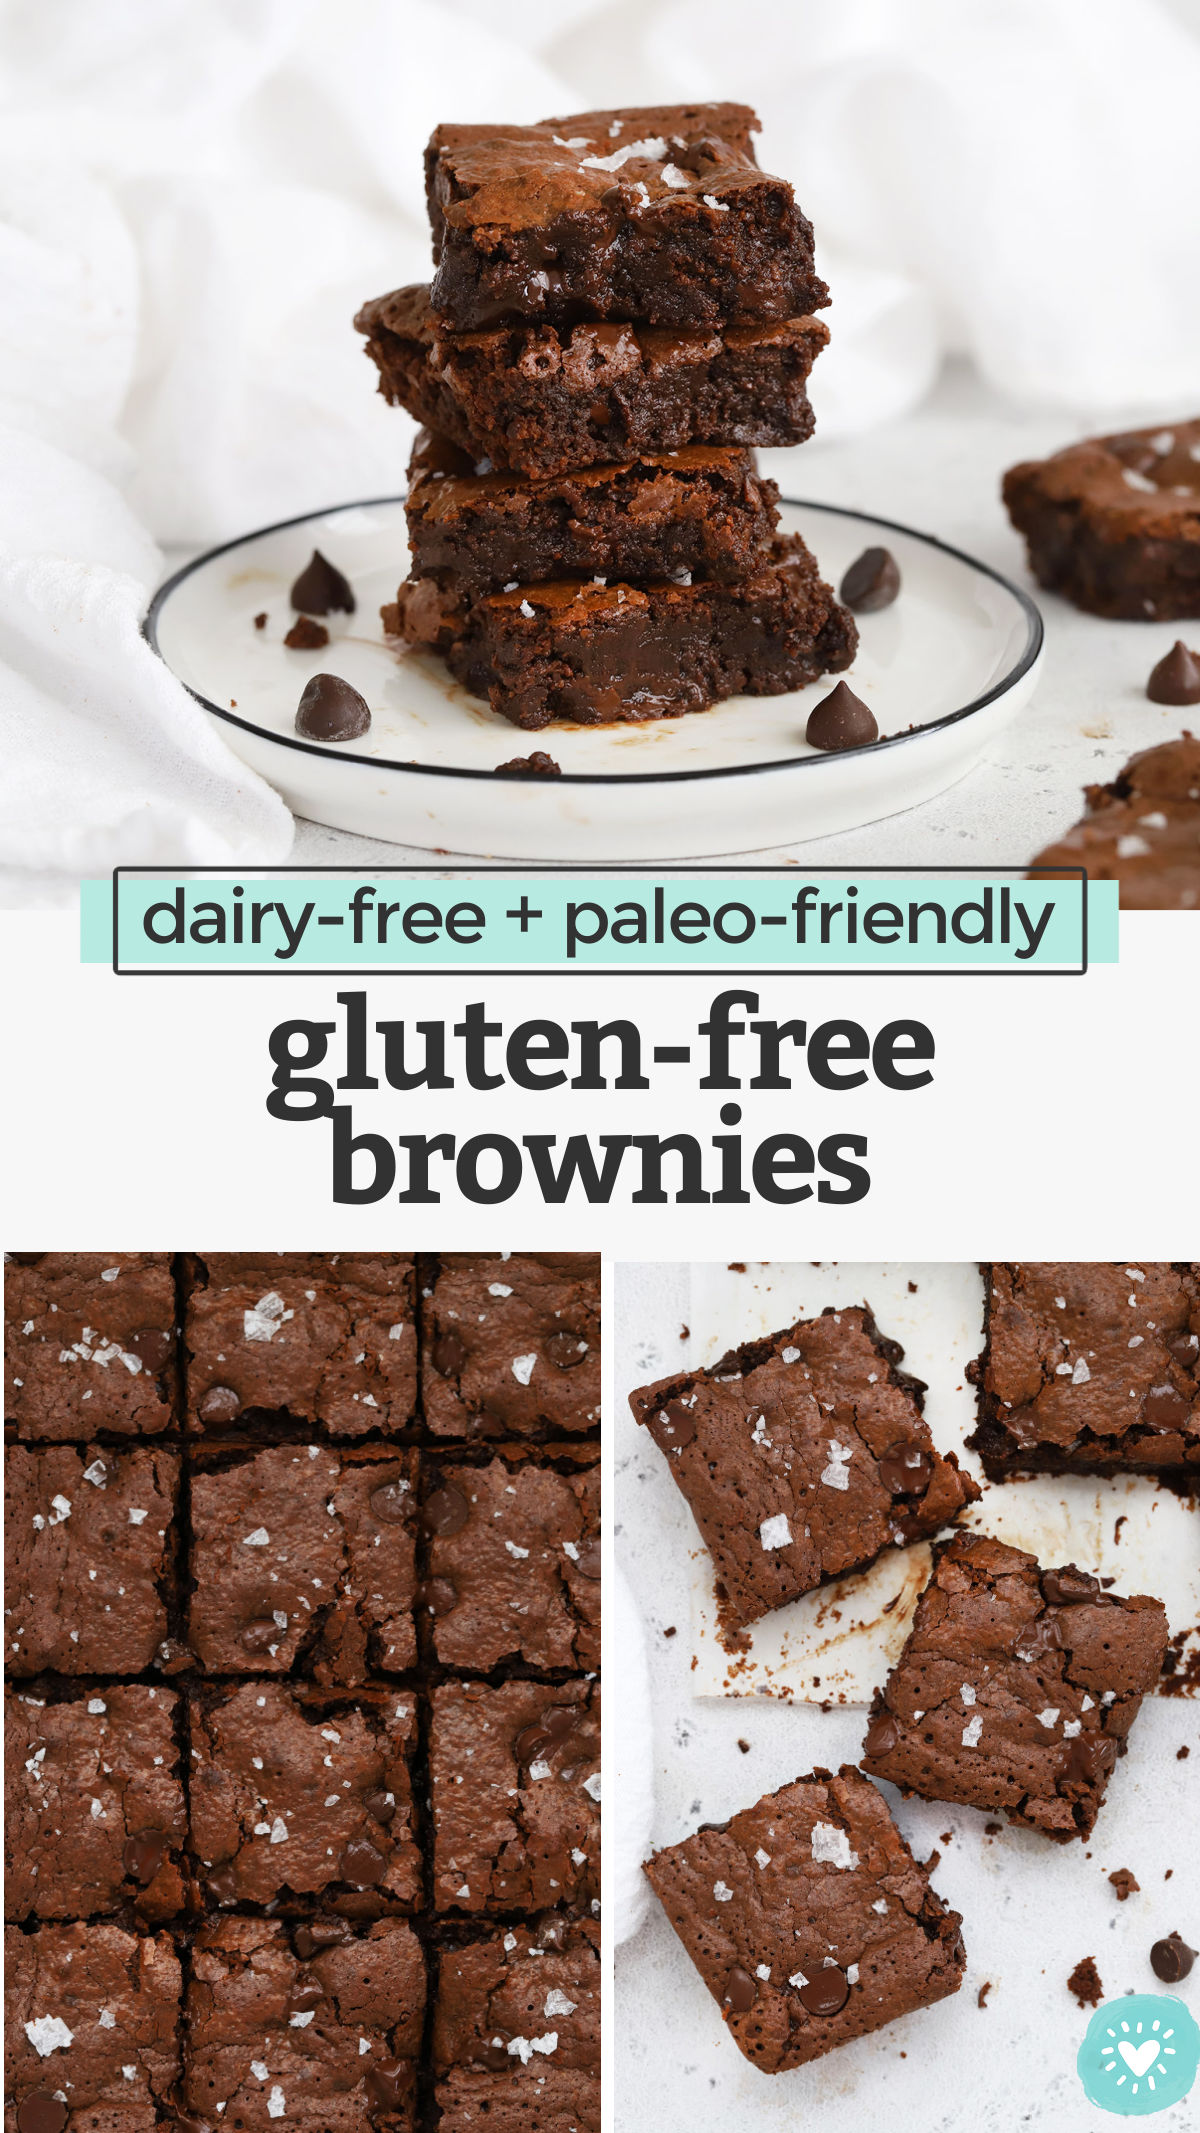 The PERFECT Gluten-Free Brownies - These almond flour brownies are everything I'm looking for--fudgy and rich, chocolatey and delicious, all without gluten, grains, or dairy! // Paleo brownies // Gluten-Free brownies // Healthy Brownies #glutenfree #paleo #brownies #almondflour